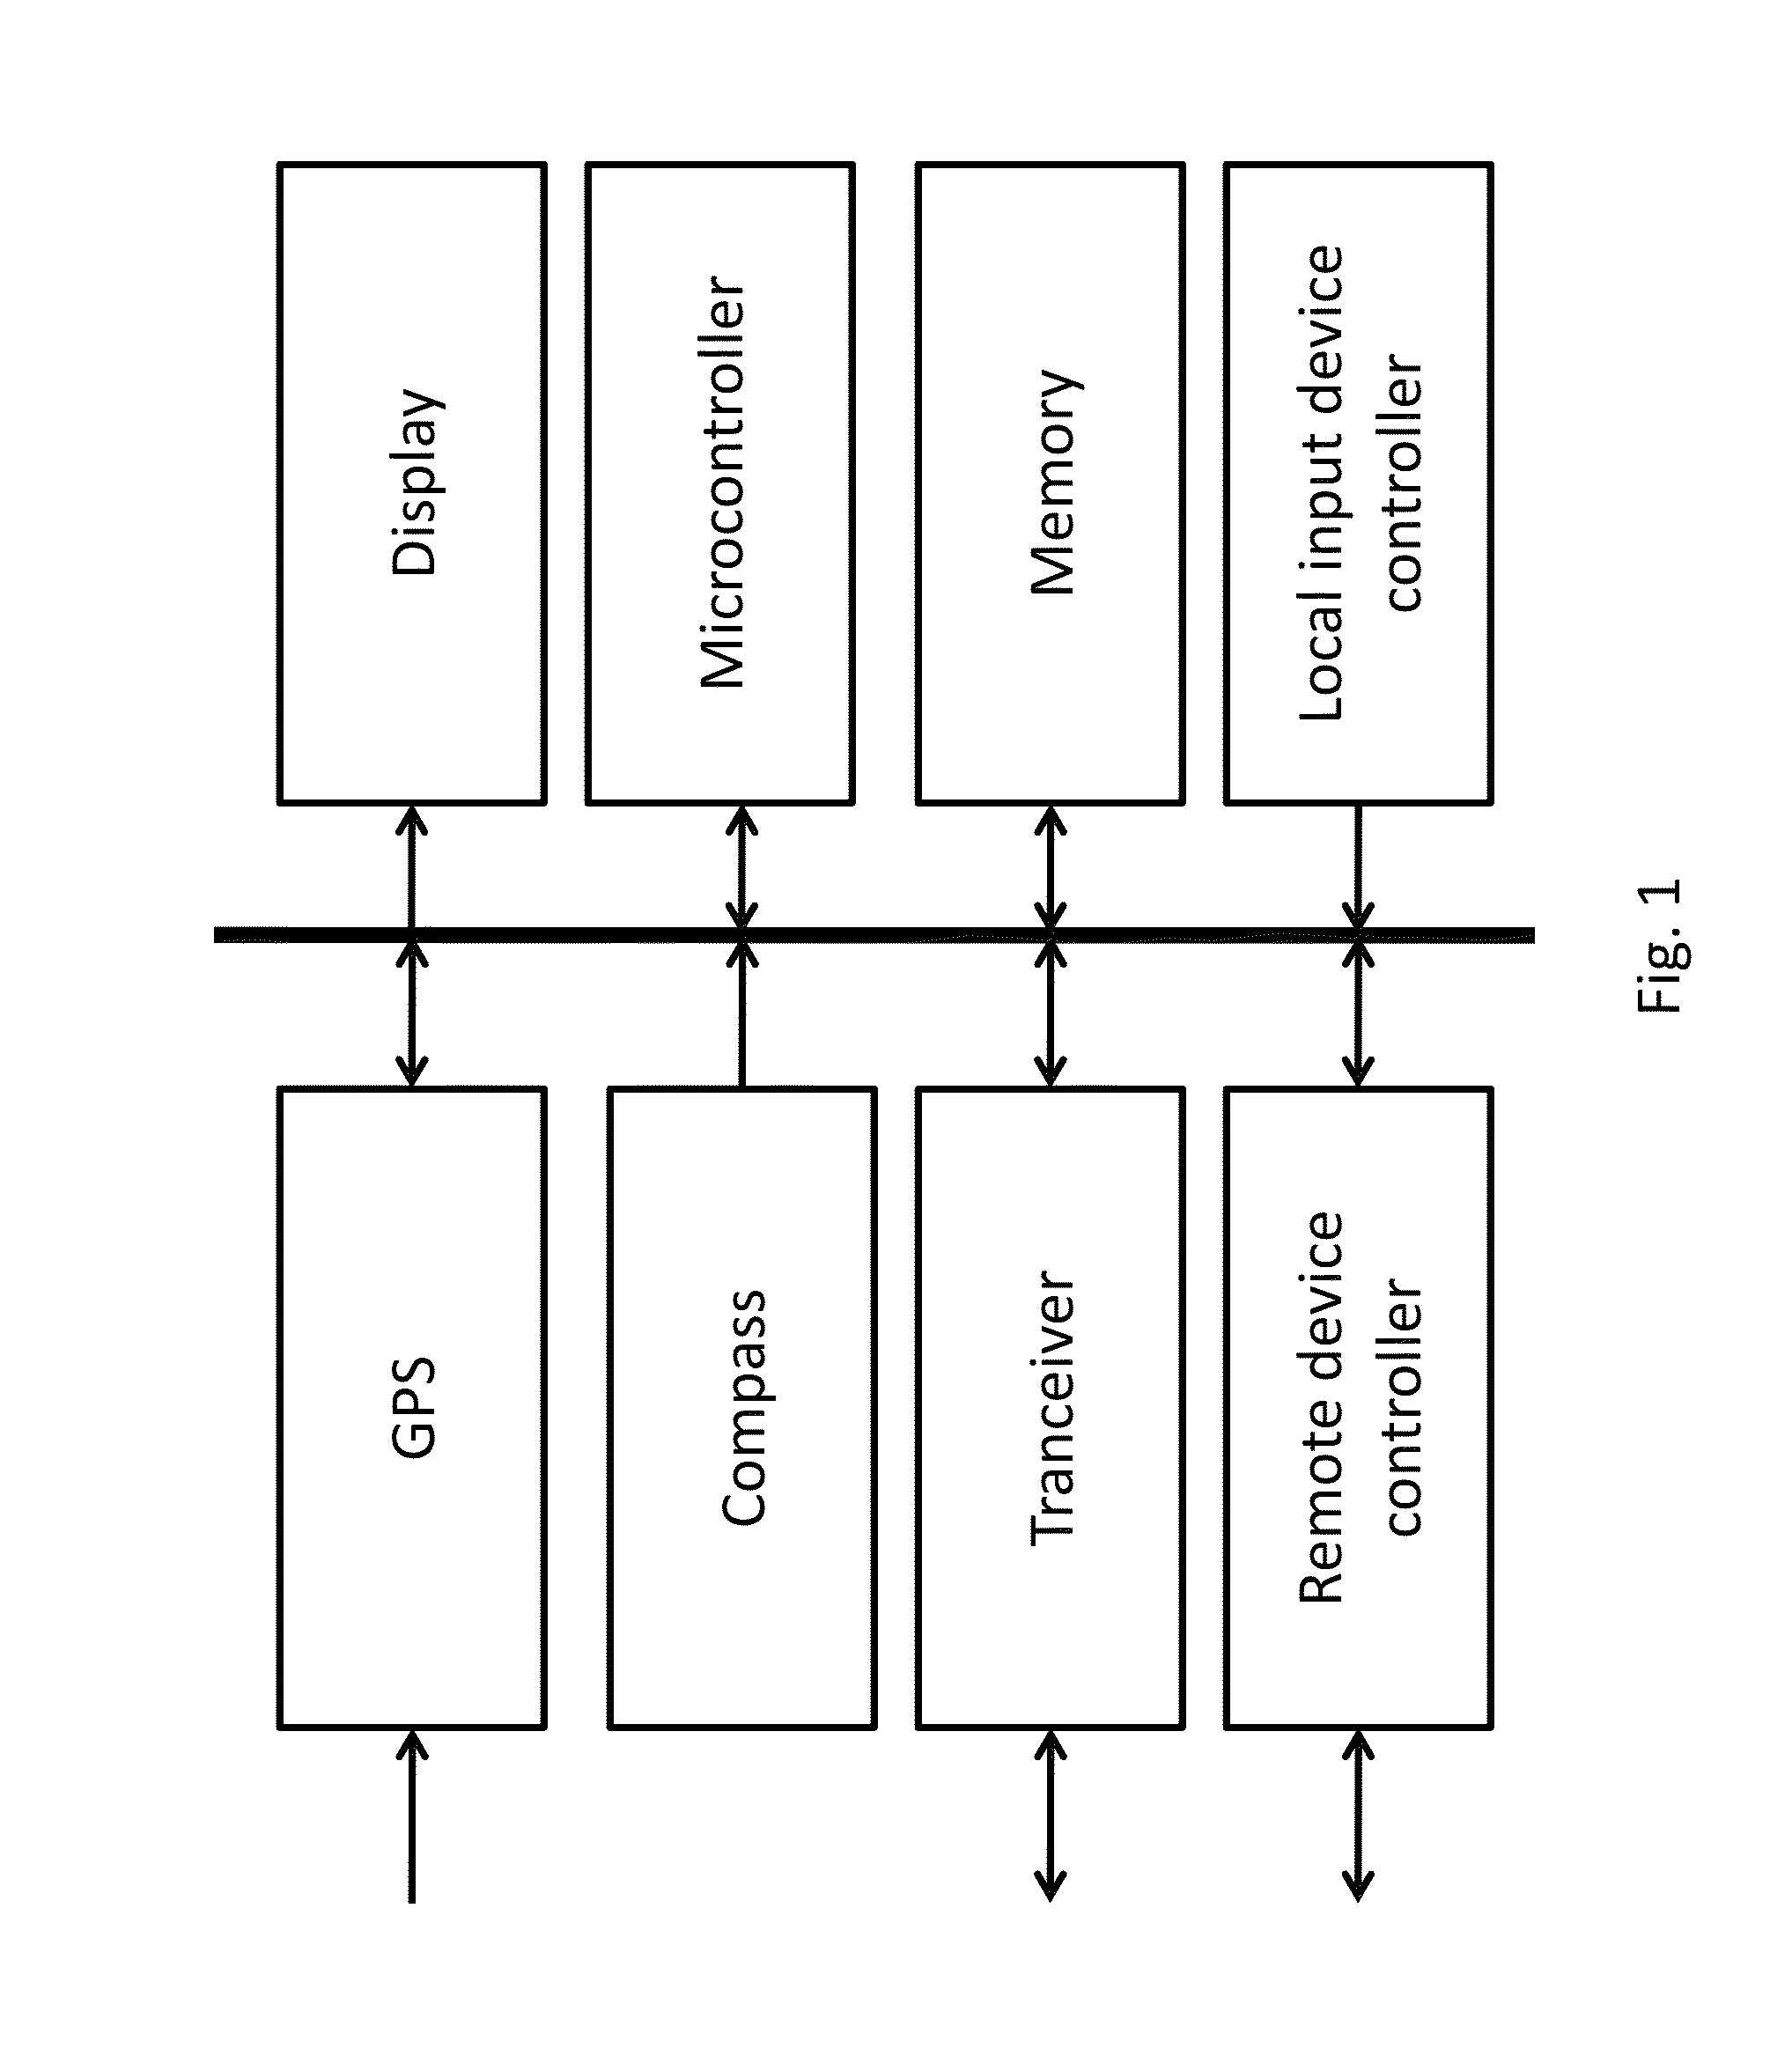 Role based system and device for command and control